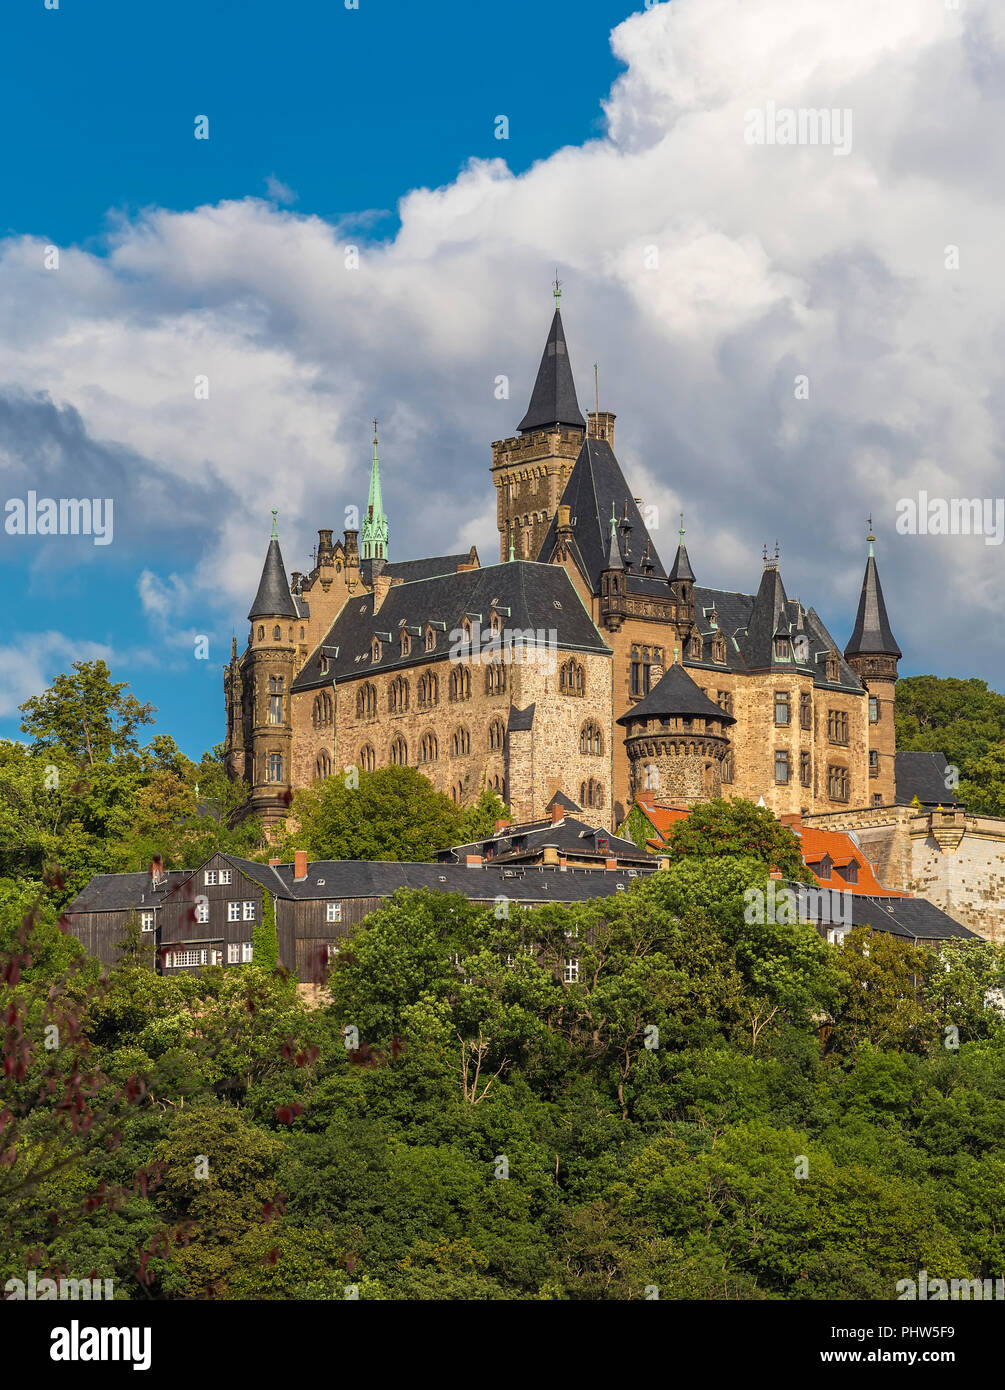 An ancient castle on the hill in the town of Wernigerode. Germany Stock Photo